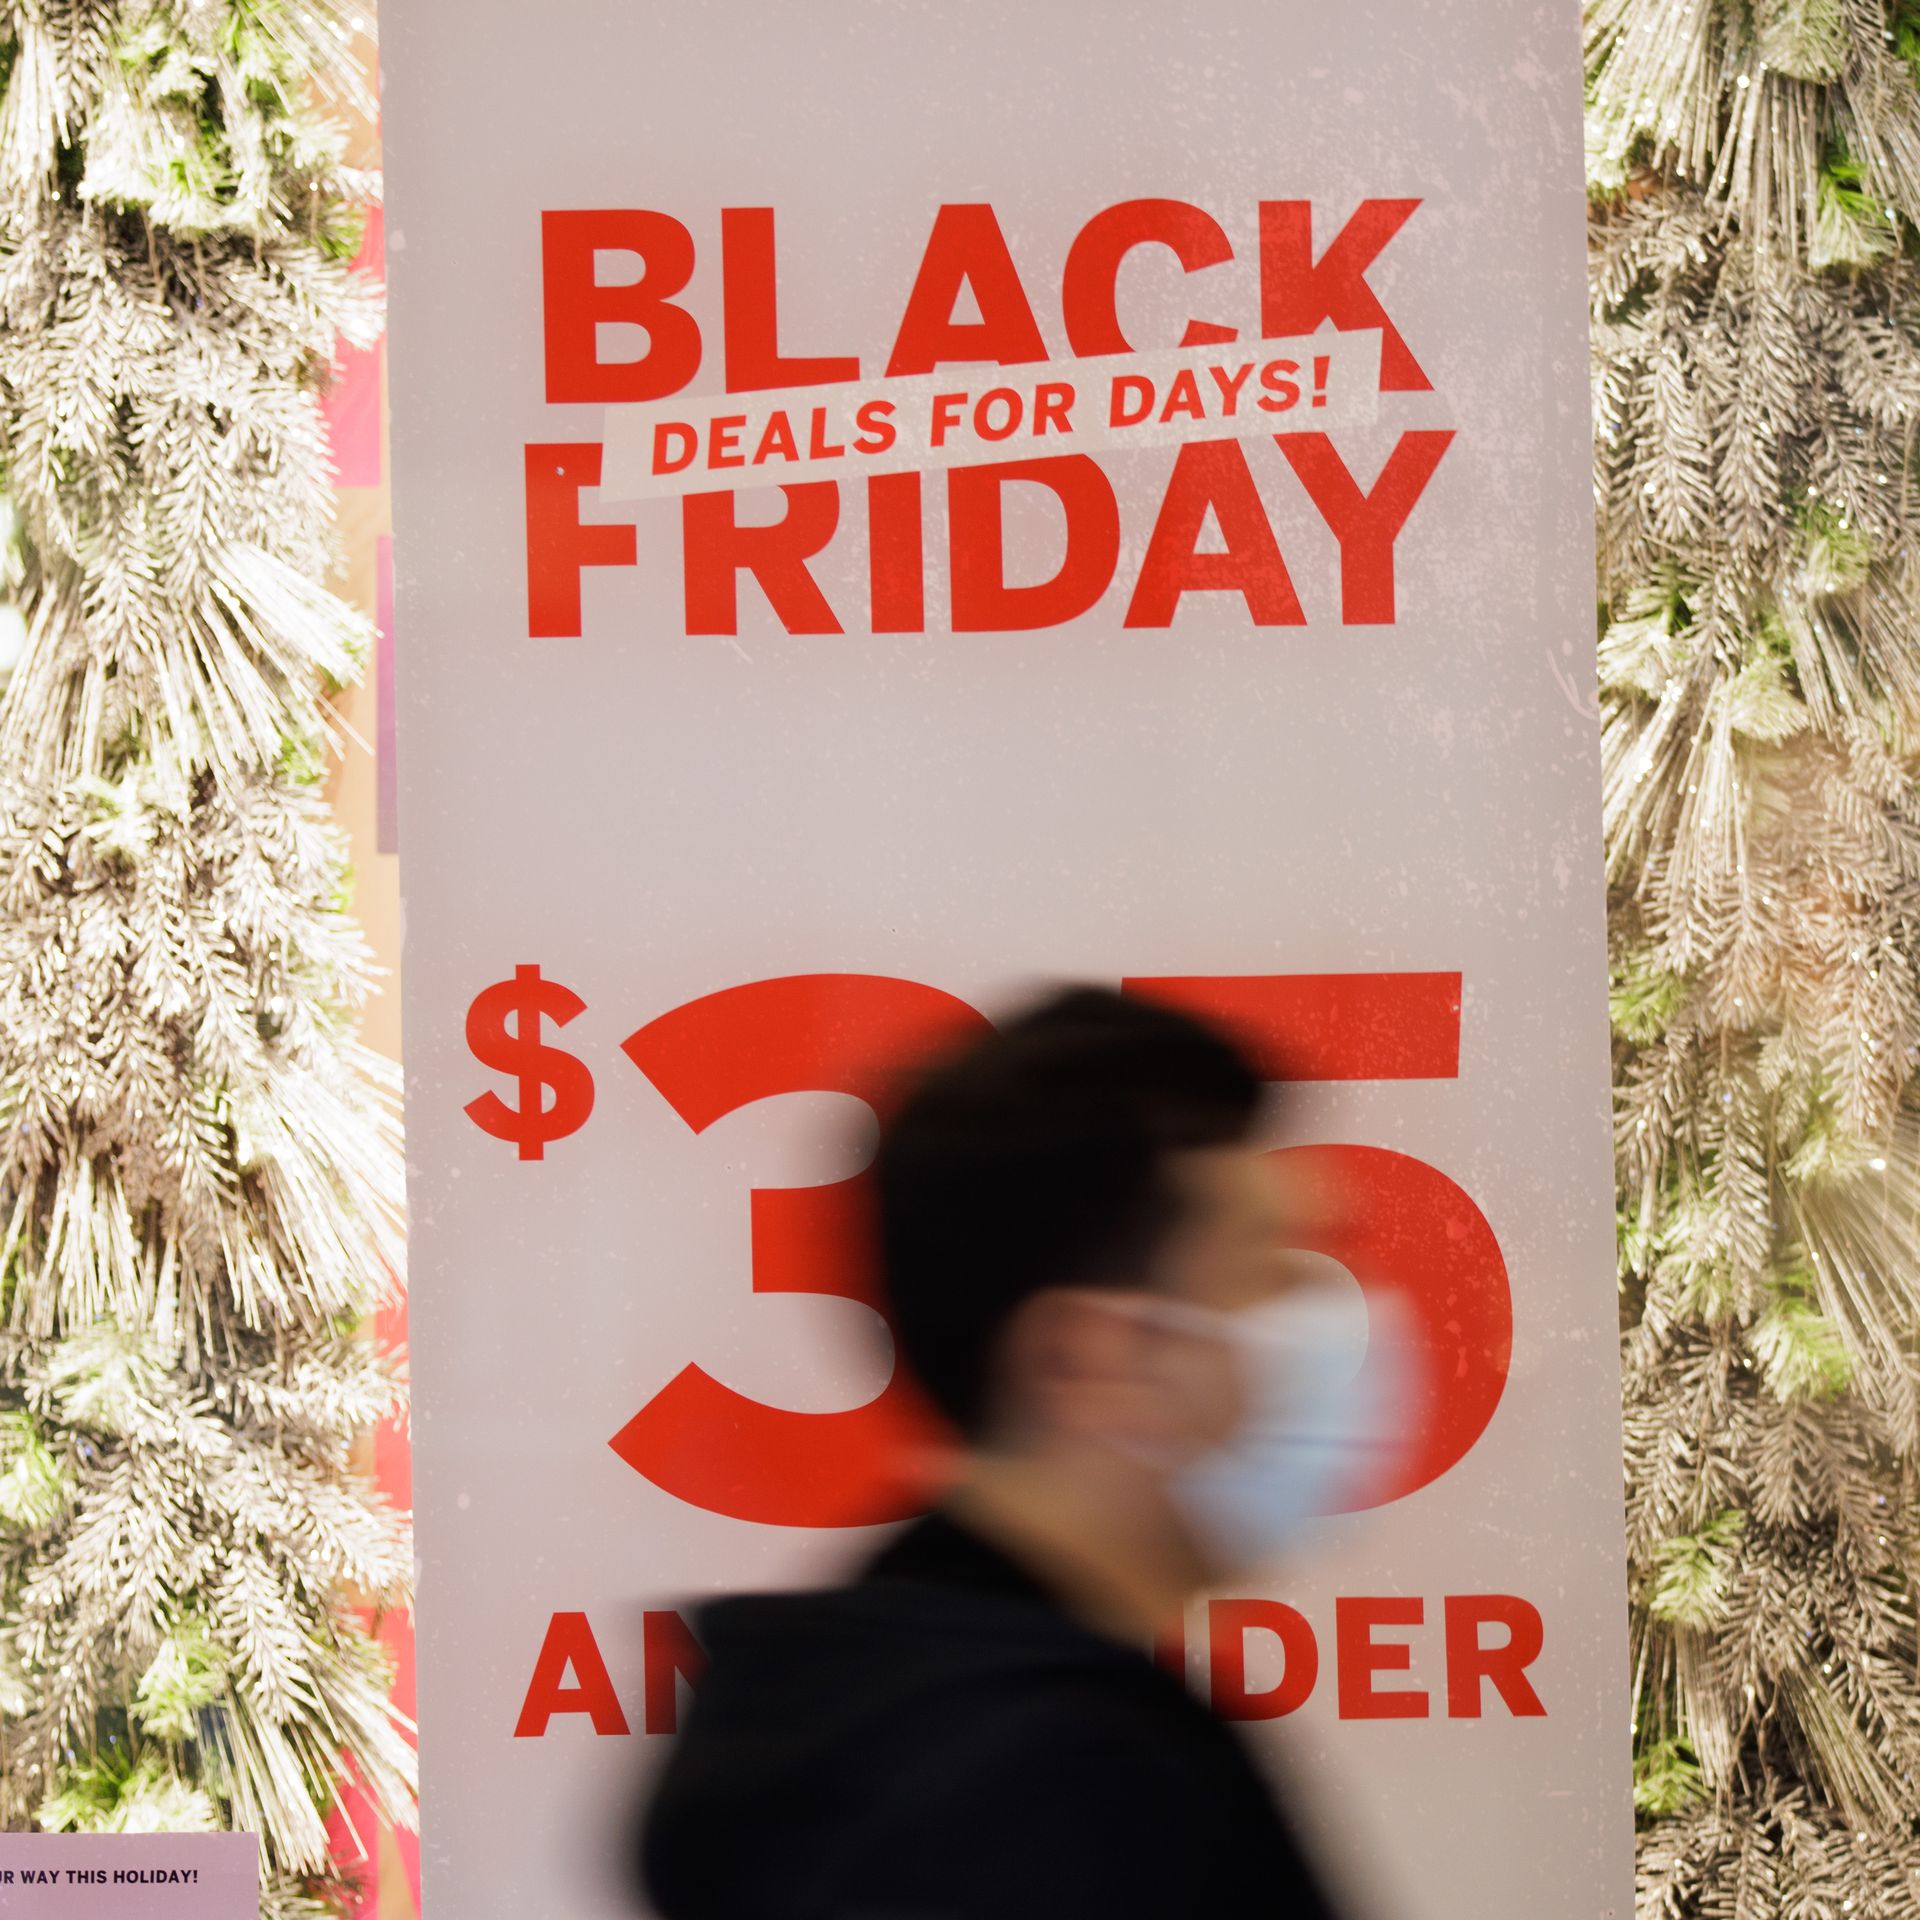 Black Friday 2020: Target, Walmart, Macy's Change Plans Due to